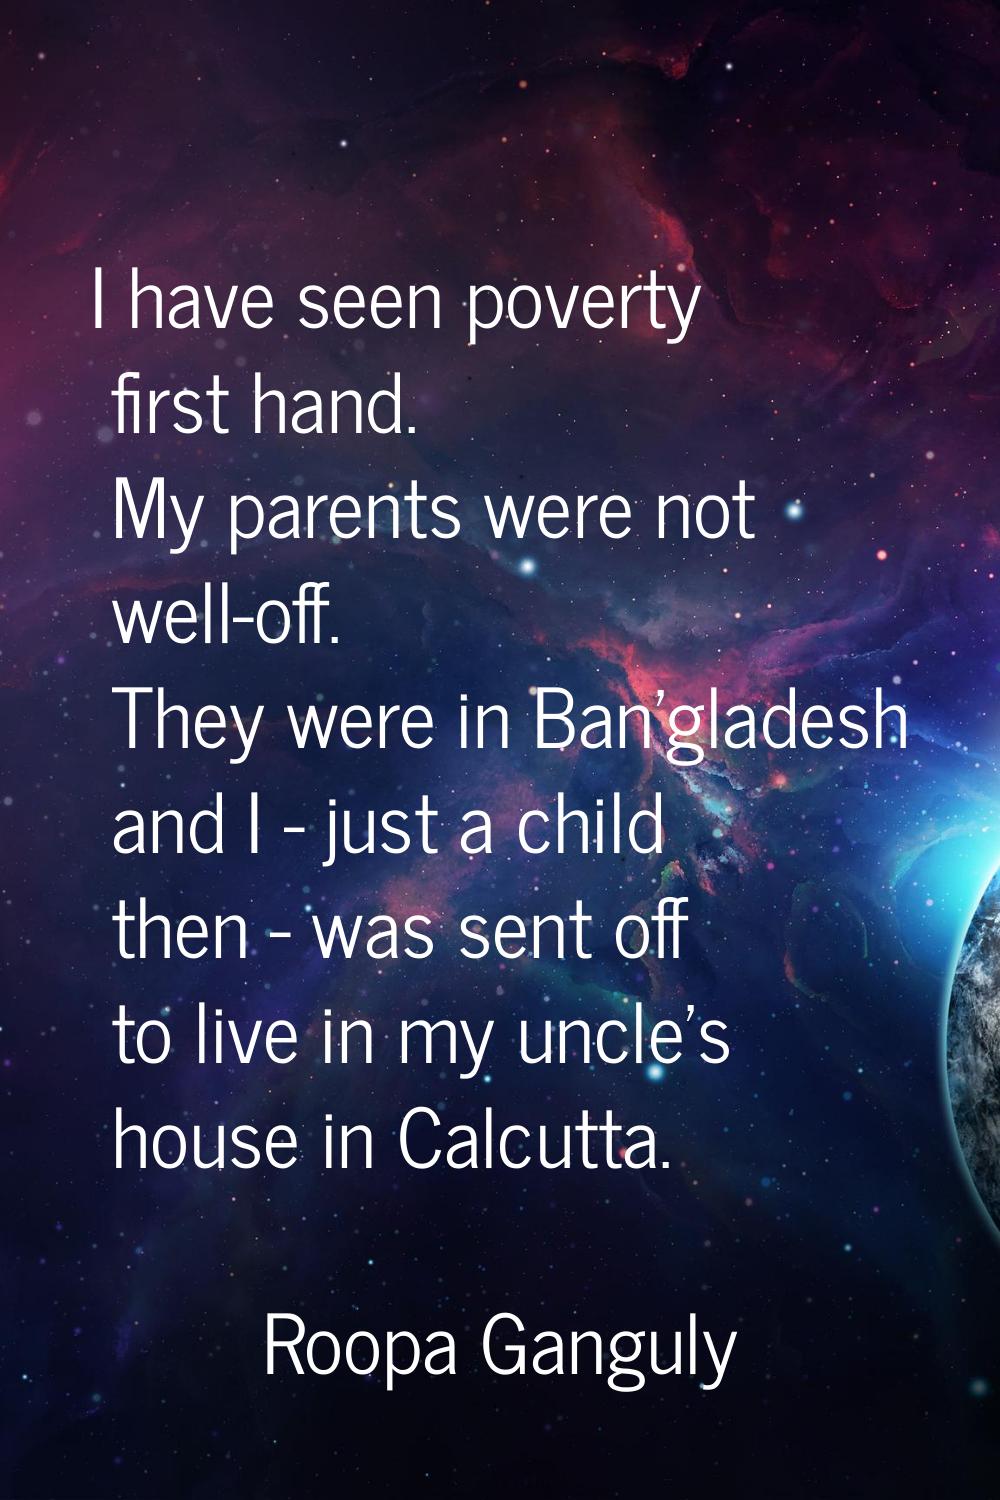 I have seen poverty first hand. My parents were not well-off. They were in Ban'gladesh and I - just